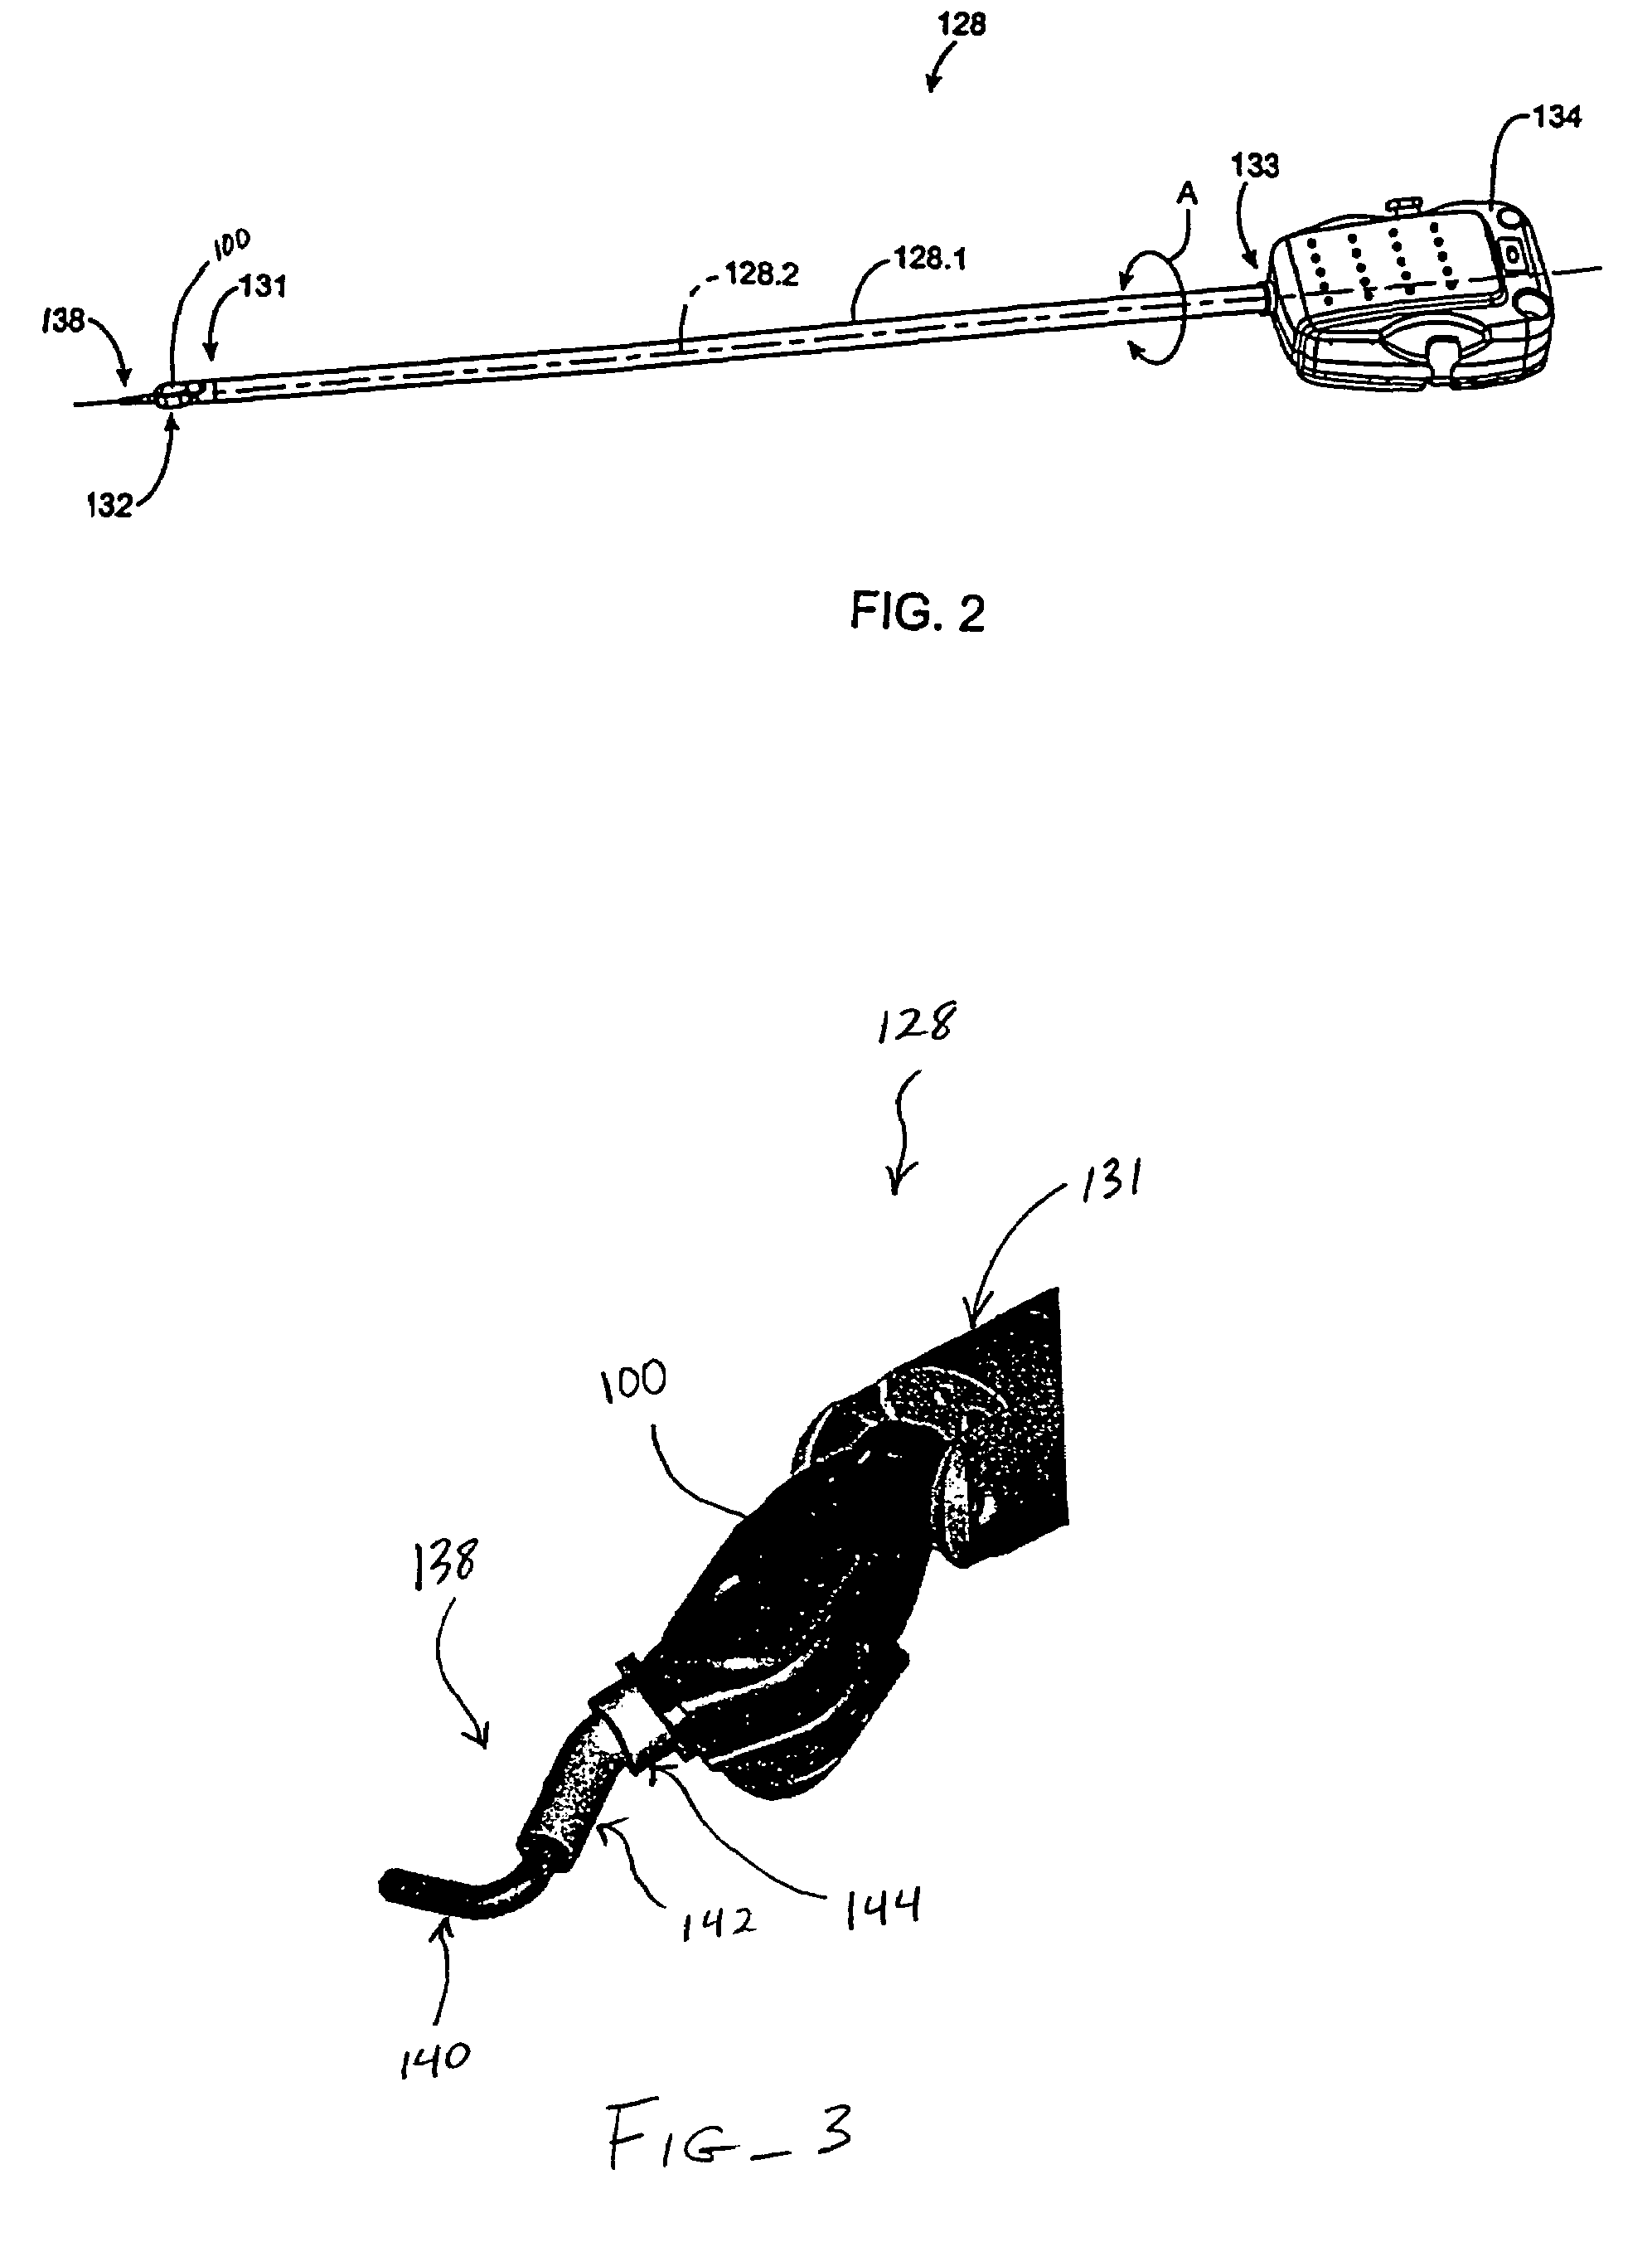 Electro-surgical instrument with replaceable end-effectors and inhibited surface conduction